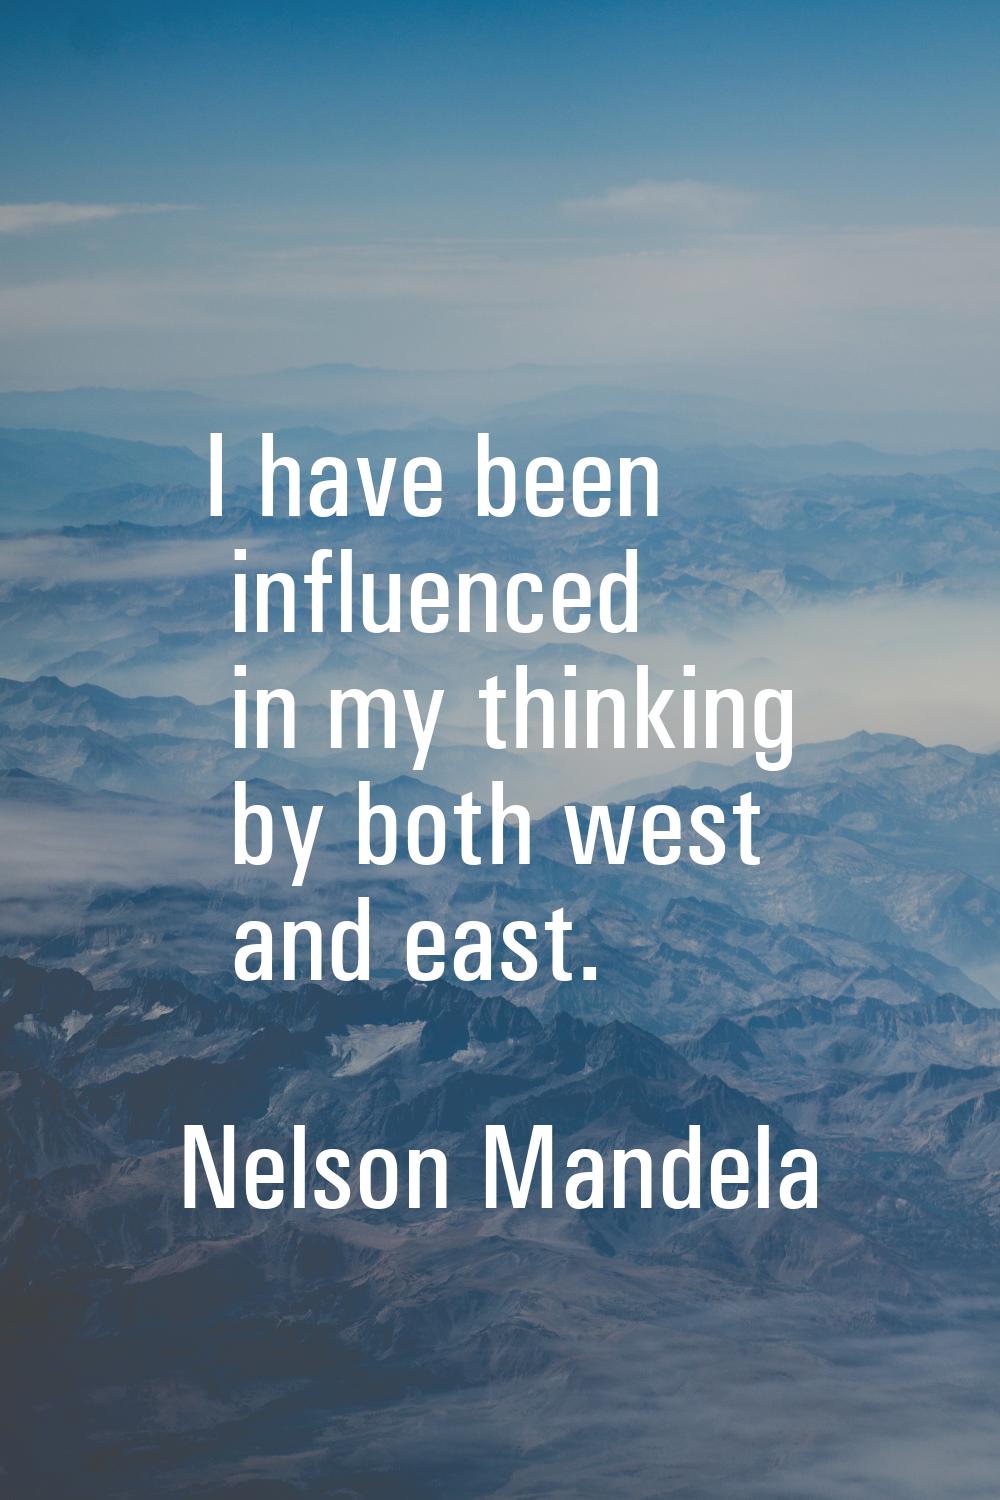 I have been influenced in my thinking by both west and east.